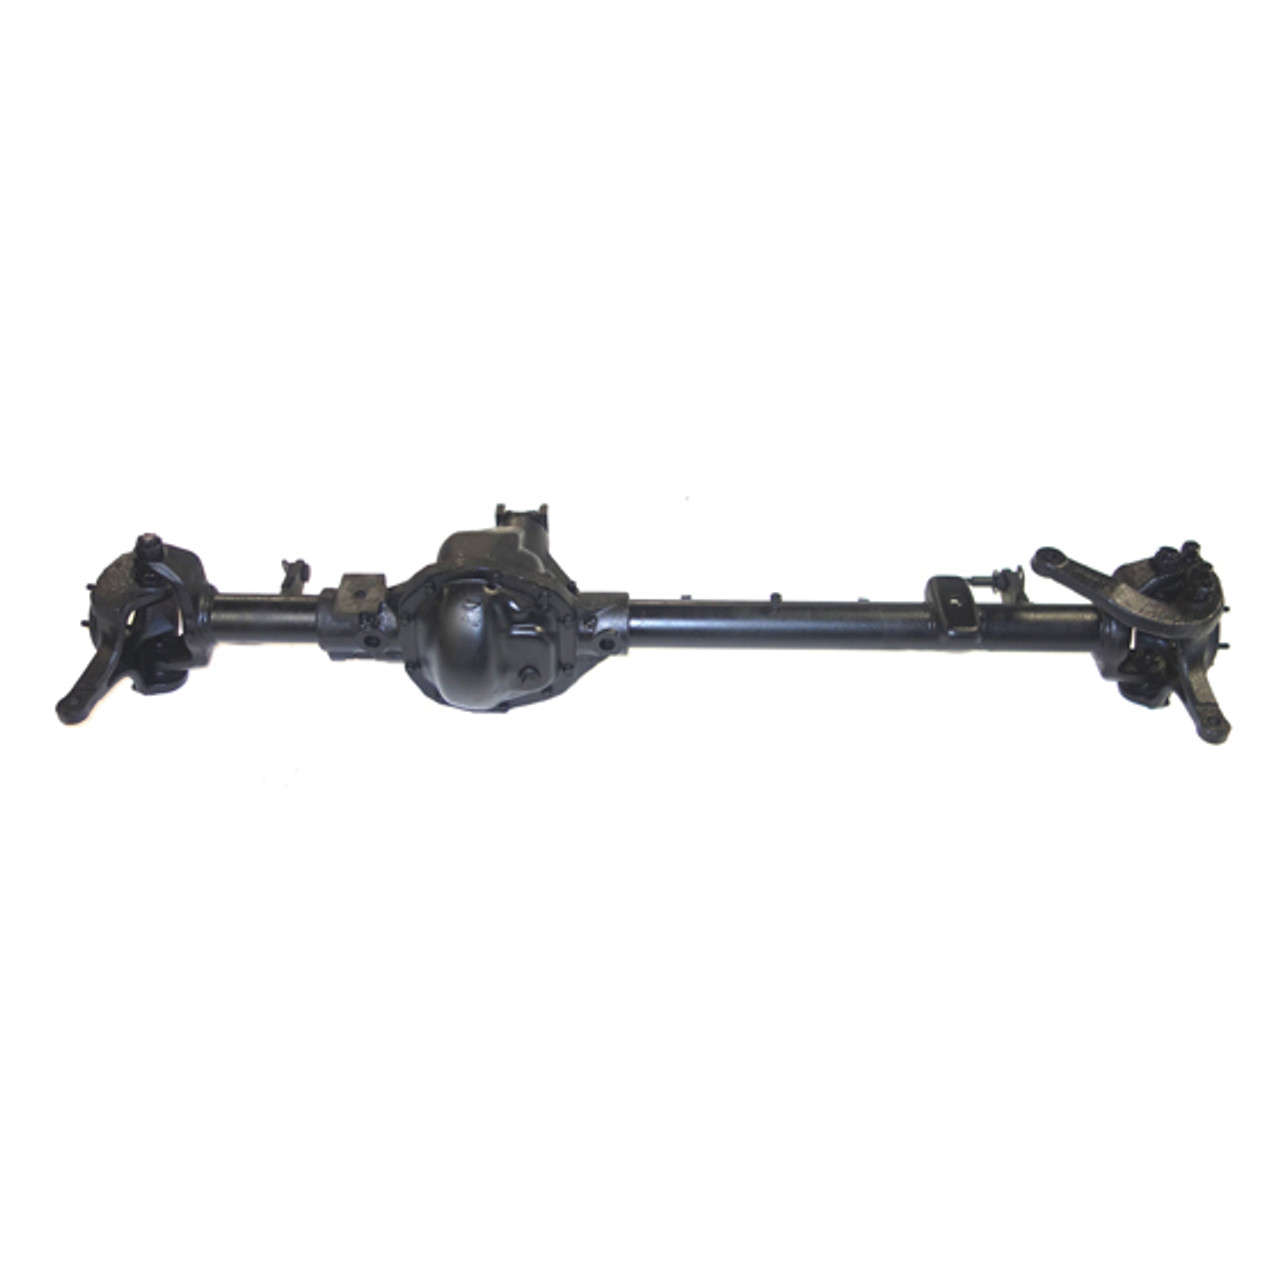 Reman Complete Axle Assembly for Dana 44 89-93 Dodge W250 3.54 Ratio with Vacuum Disconnect